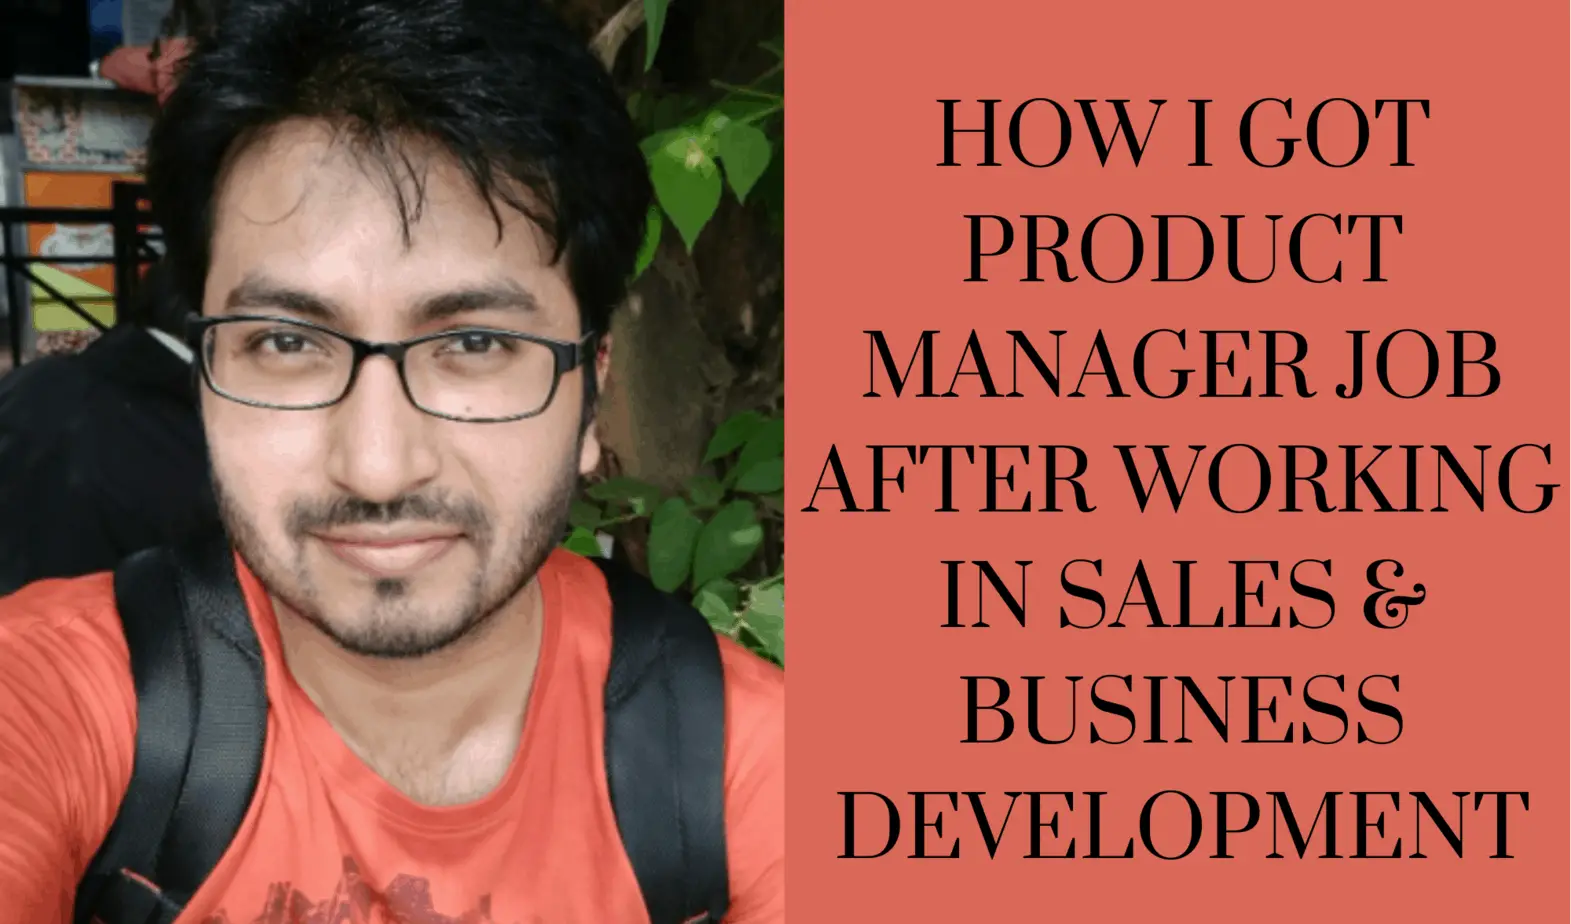 How I Got Product Manager Job after working in sales & Business Development